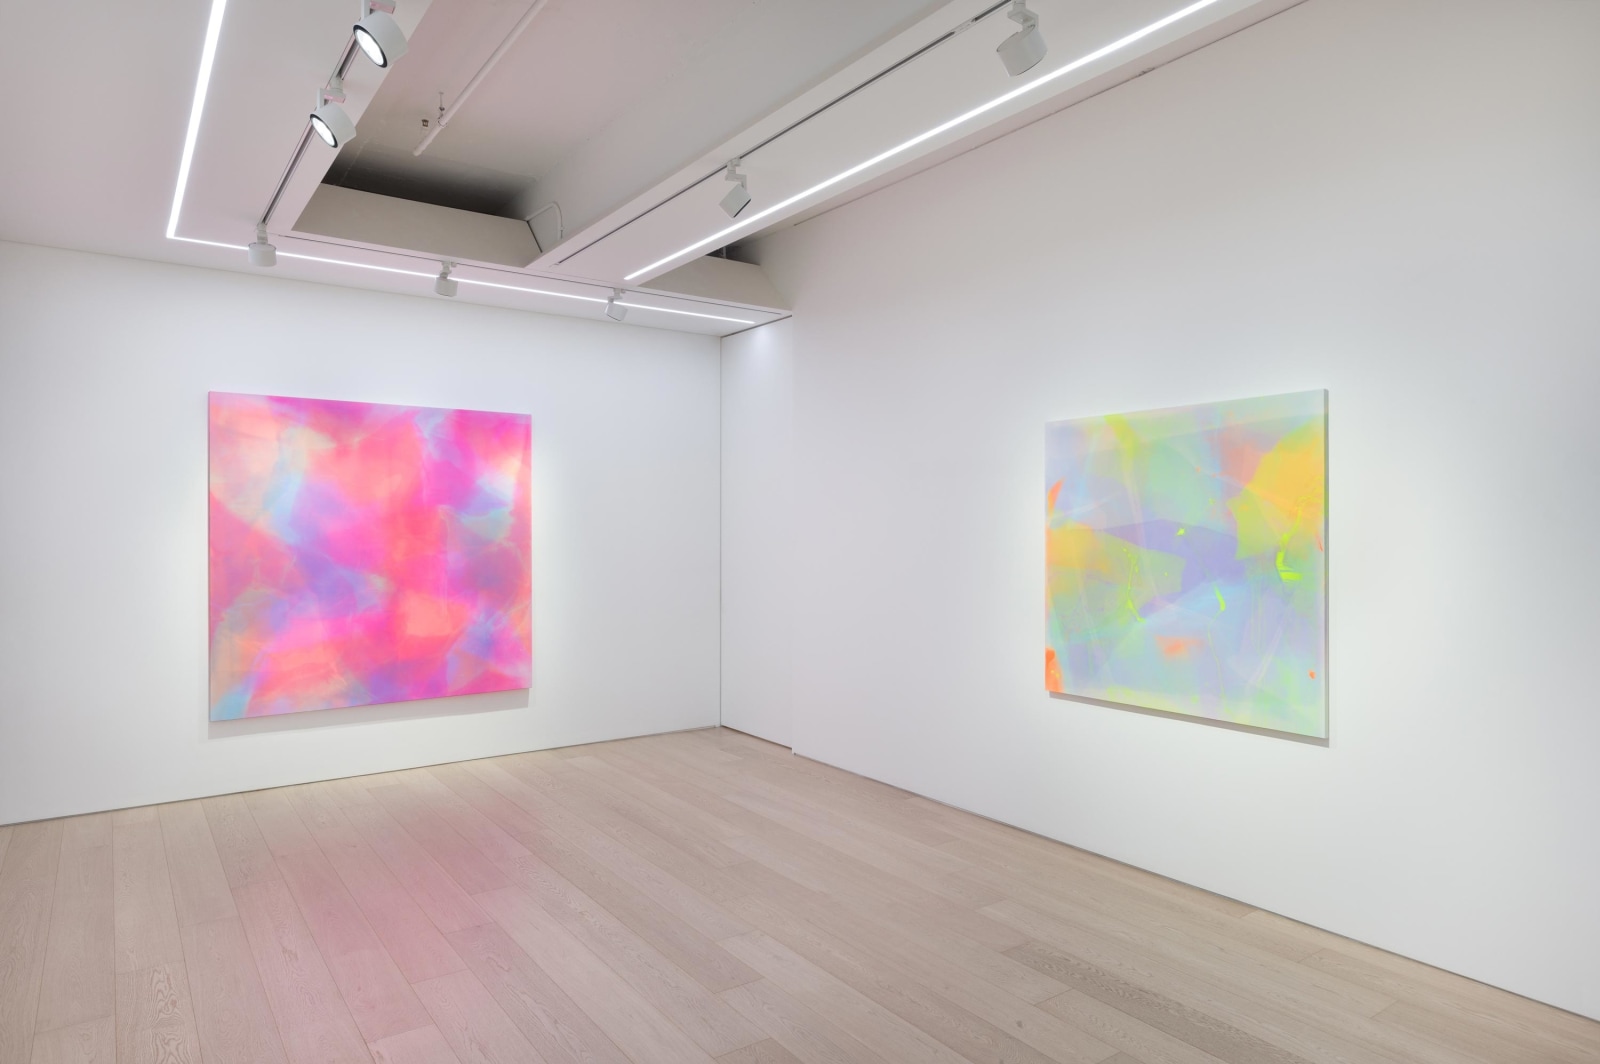 Noblesse&nbsp;spoke with artist Kim Taek Sang on the occassion of Reflections and Refractions at Lehmann Maupin Seoul&nbsp;